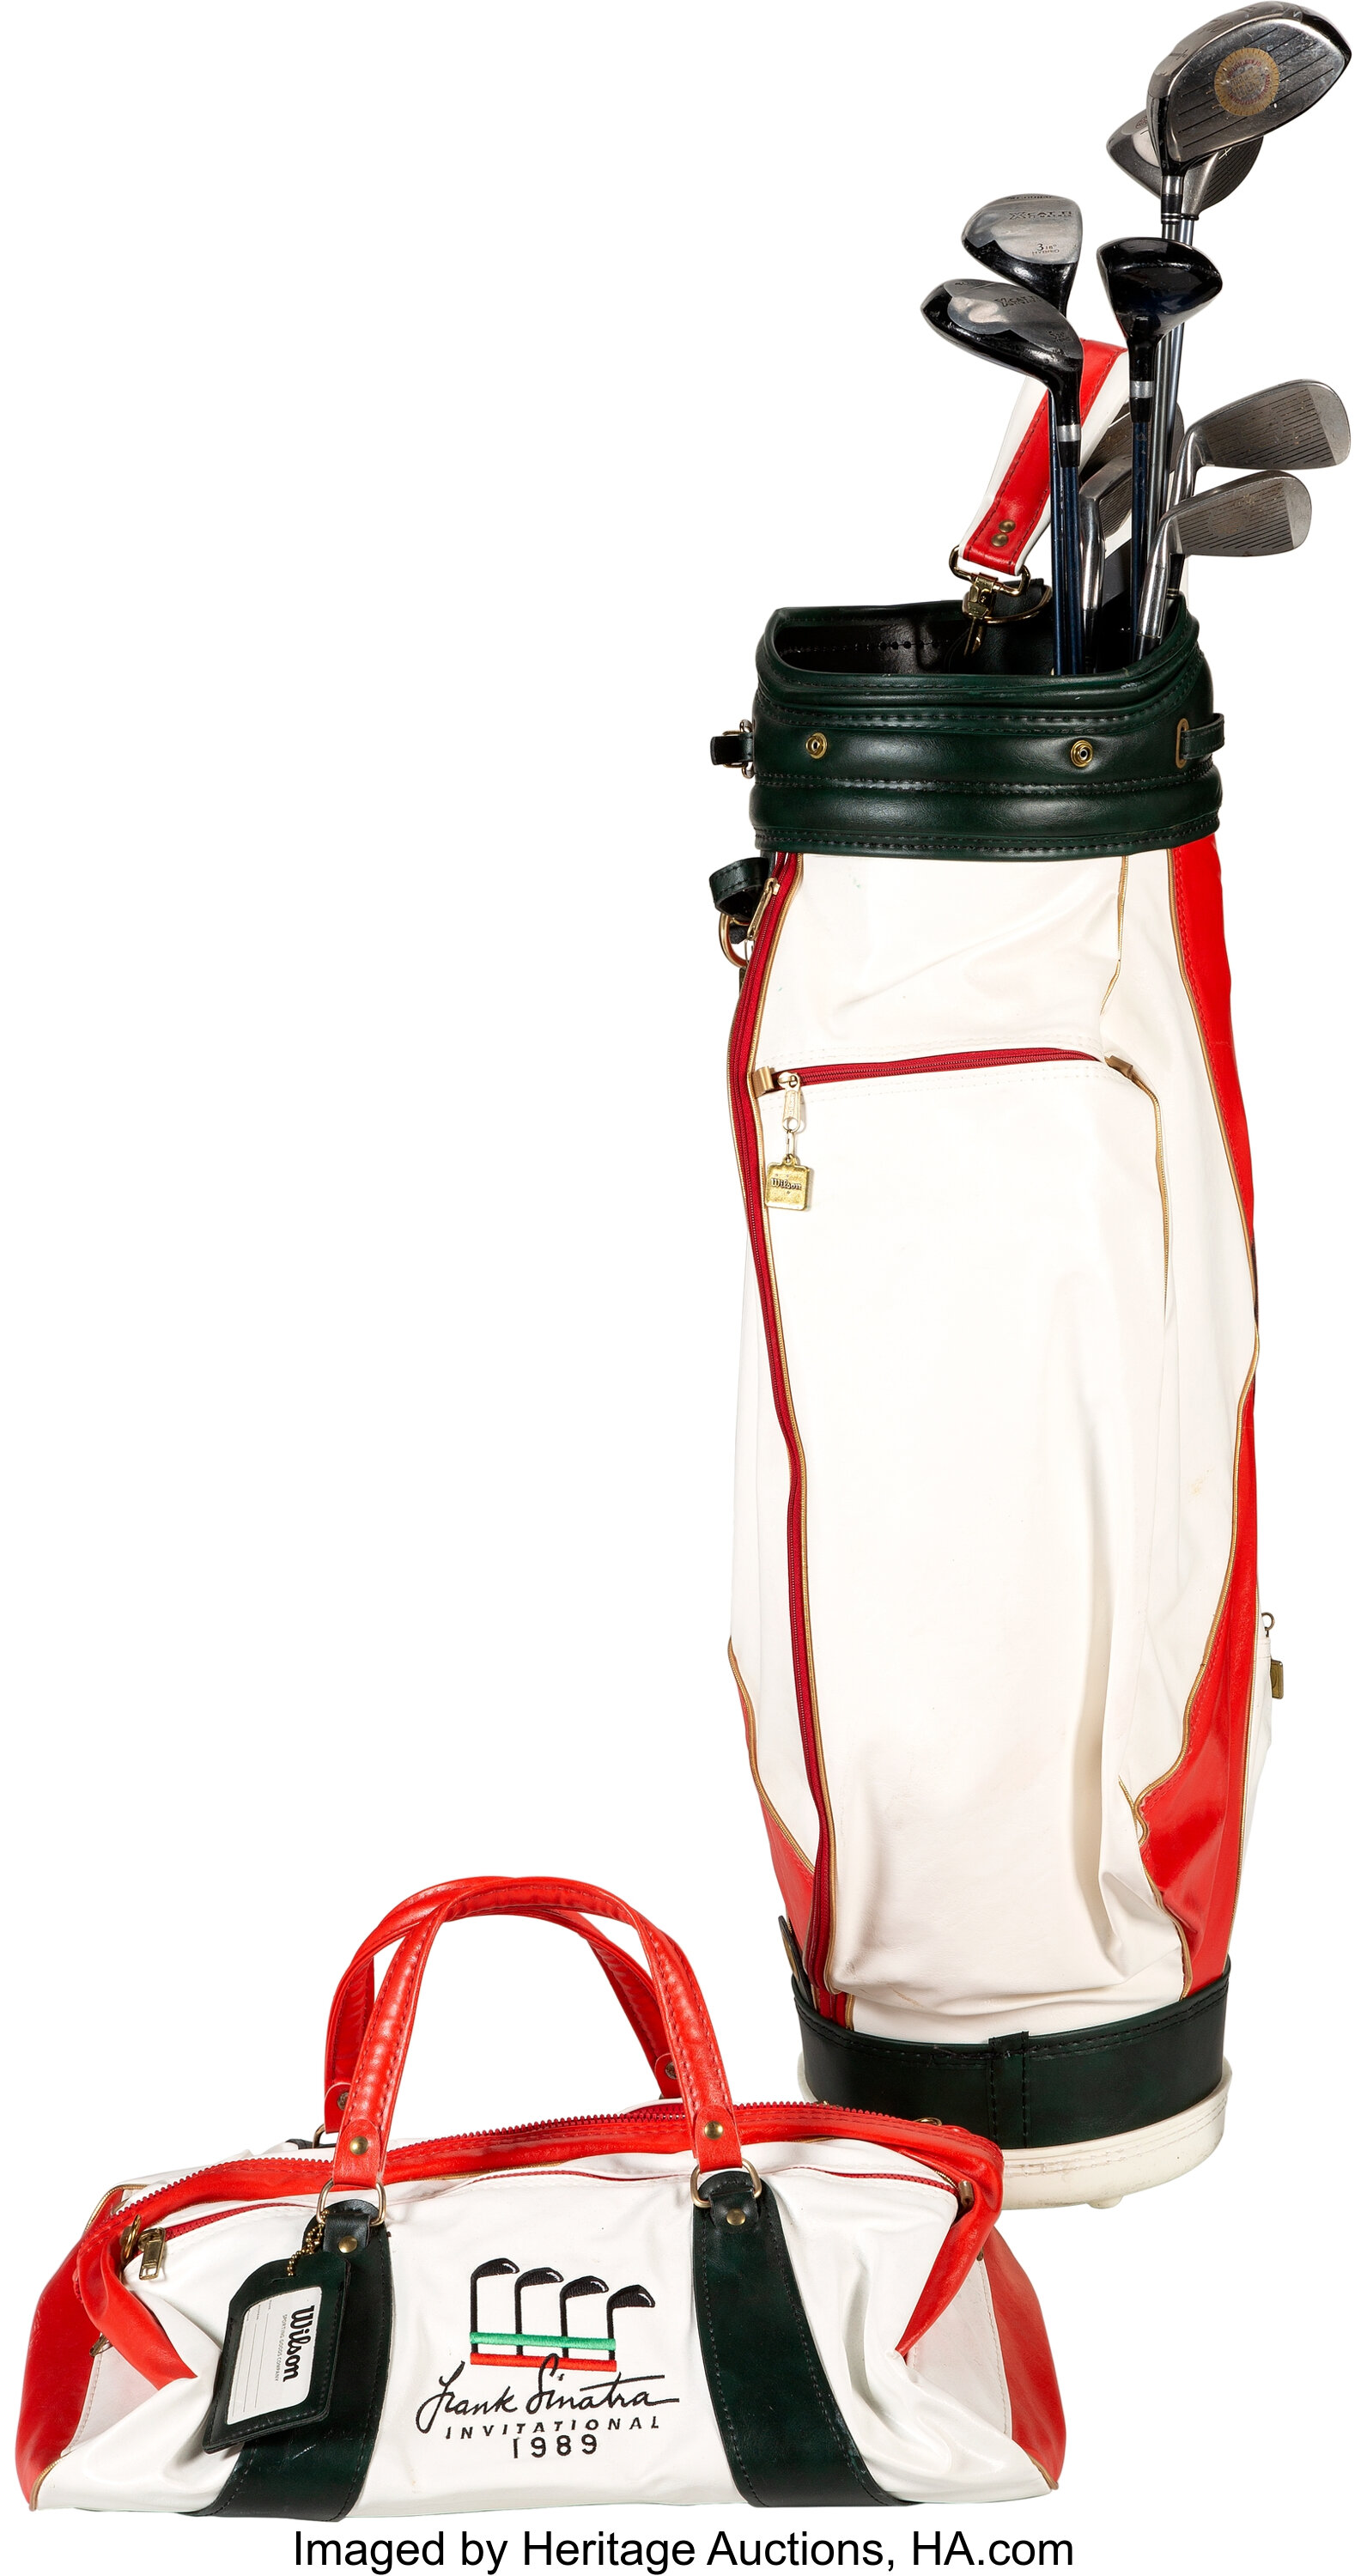 Five Retro-Style Golf Bags That Recapture the Game's Roots – Robb